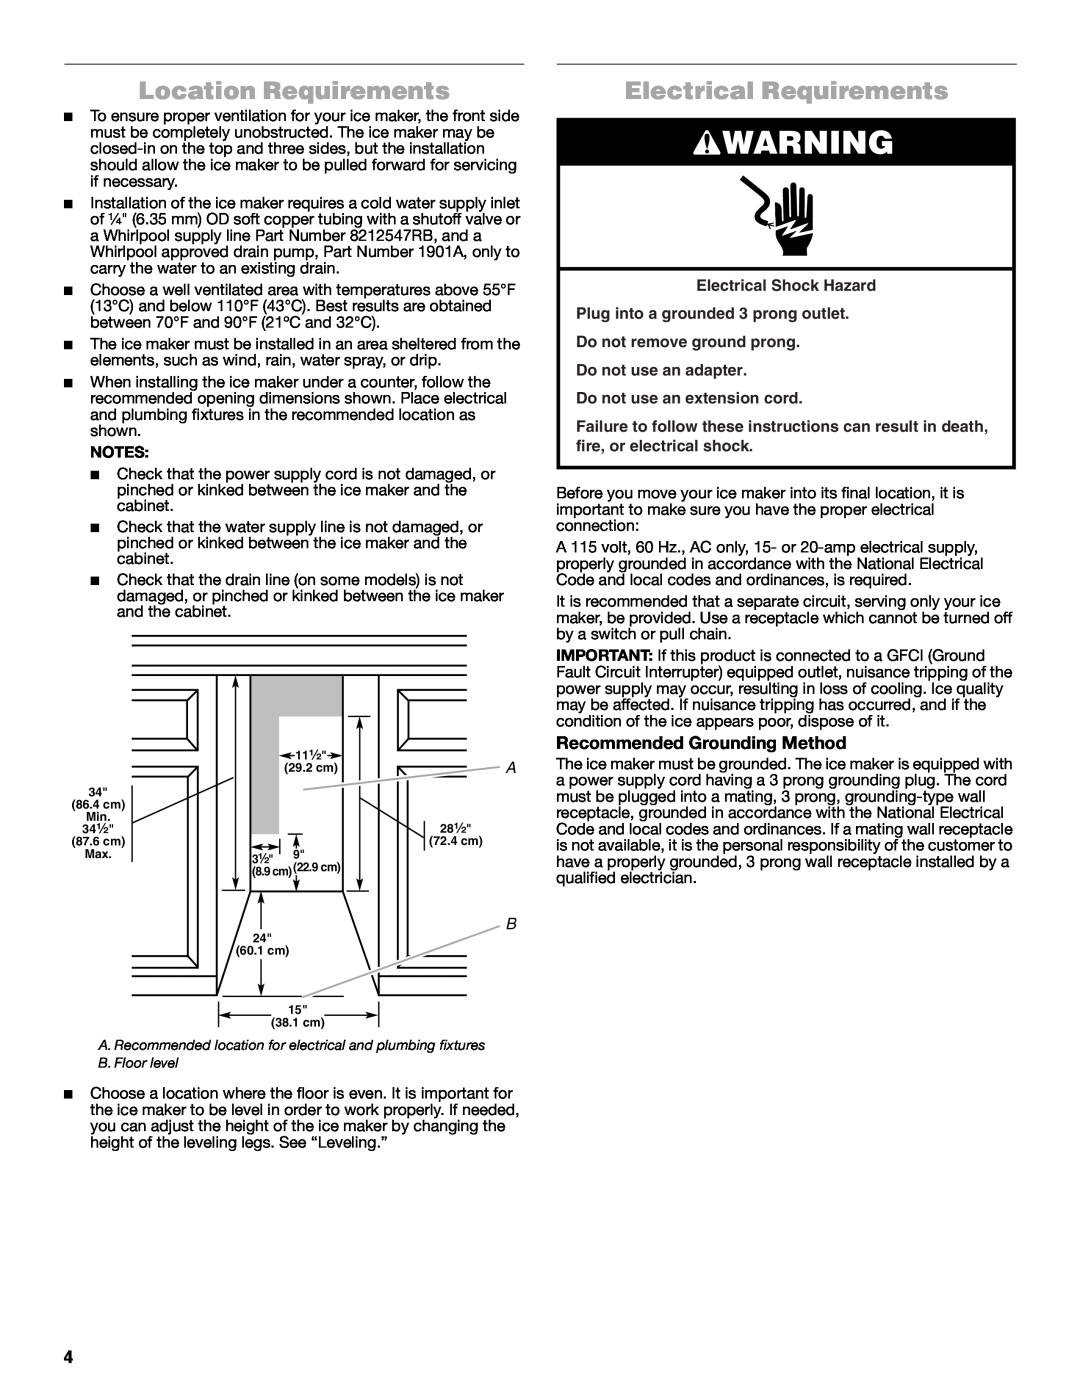 Jenn-Air W10519943B manual Location Requirements, Electrical Requirements, Recommended Grounding Method 